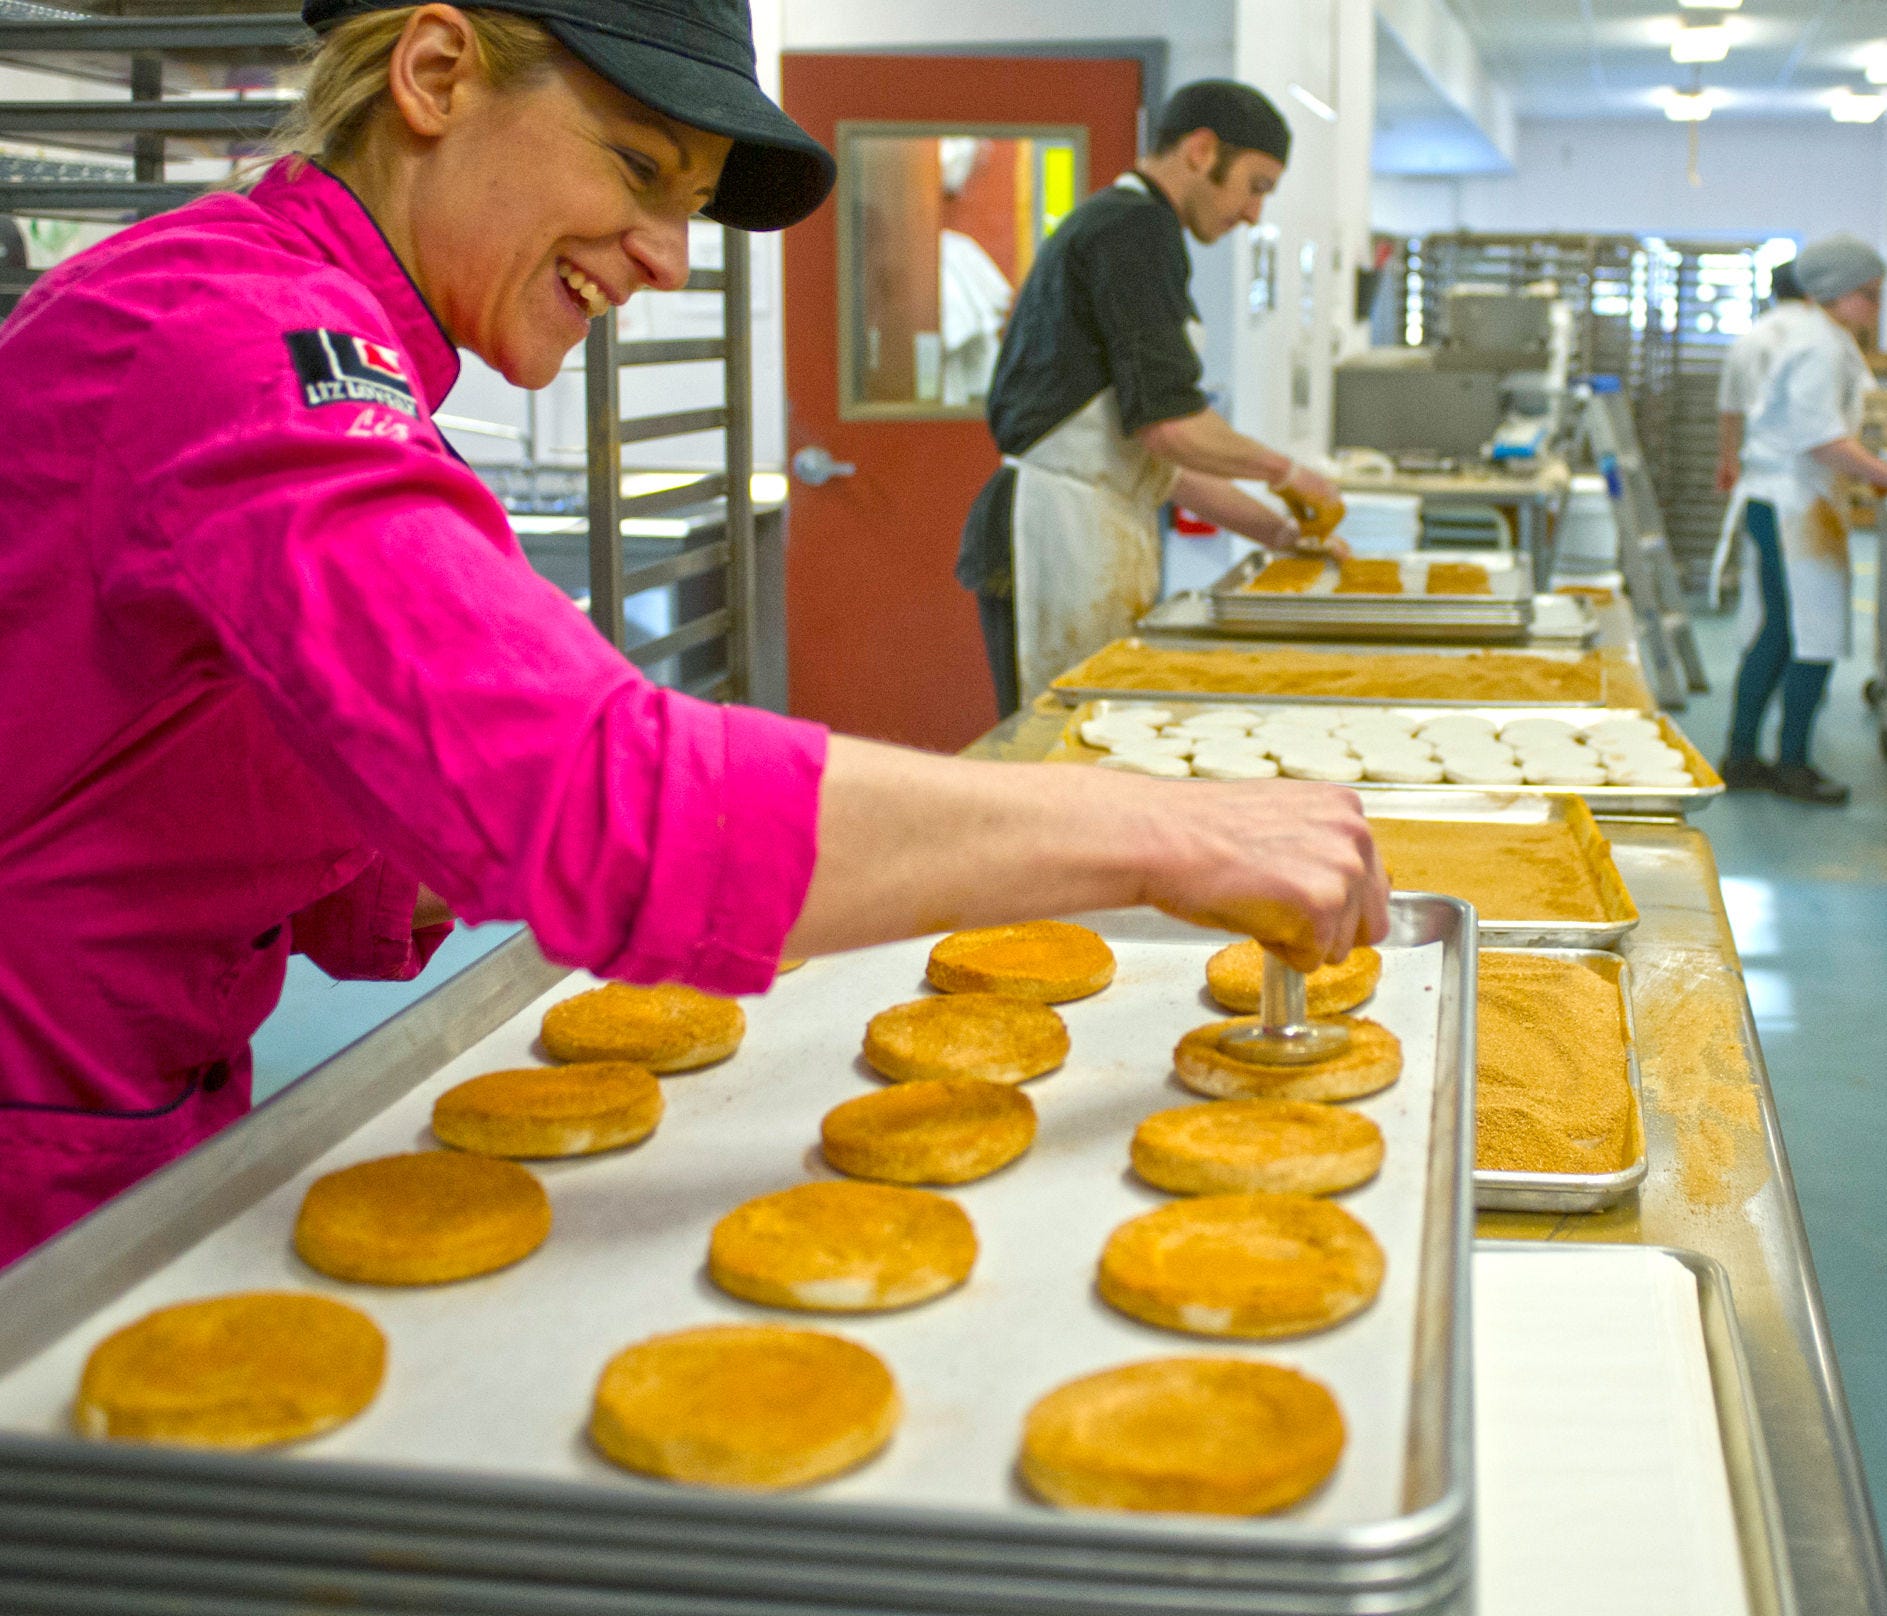 Liz Holtz, owner of Liz Lovely, works on coating cinnamon sugar cookies on the production line at her bakery in Waitsfield on March 19. Liz Lovely specializes in making vegan, gluten-, and GMO-free cookies.